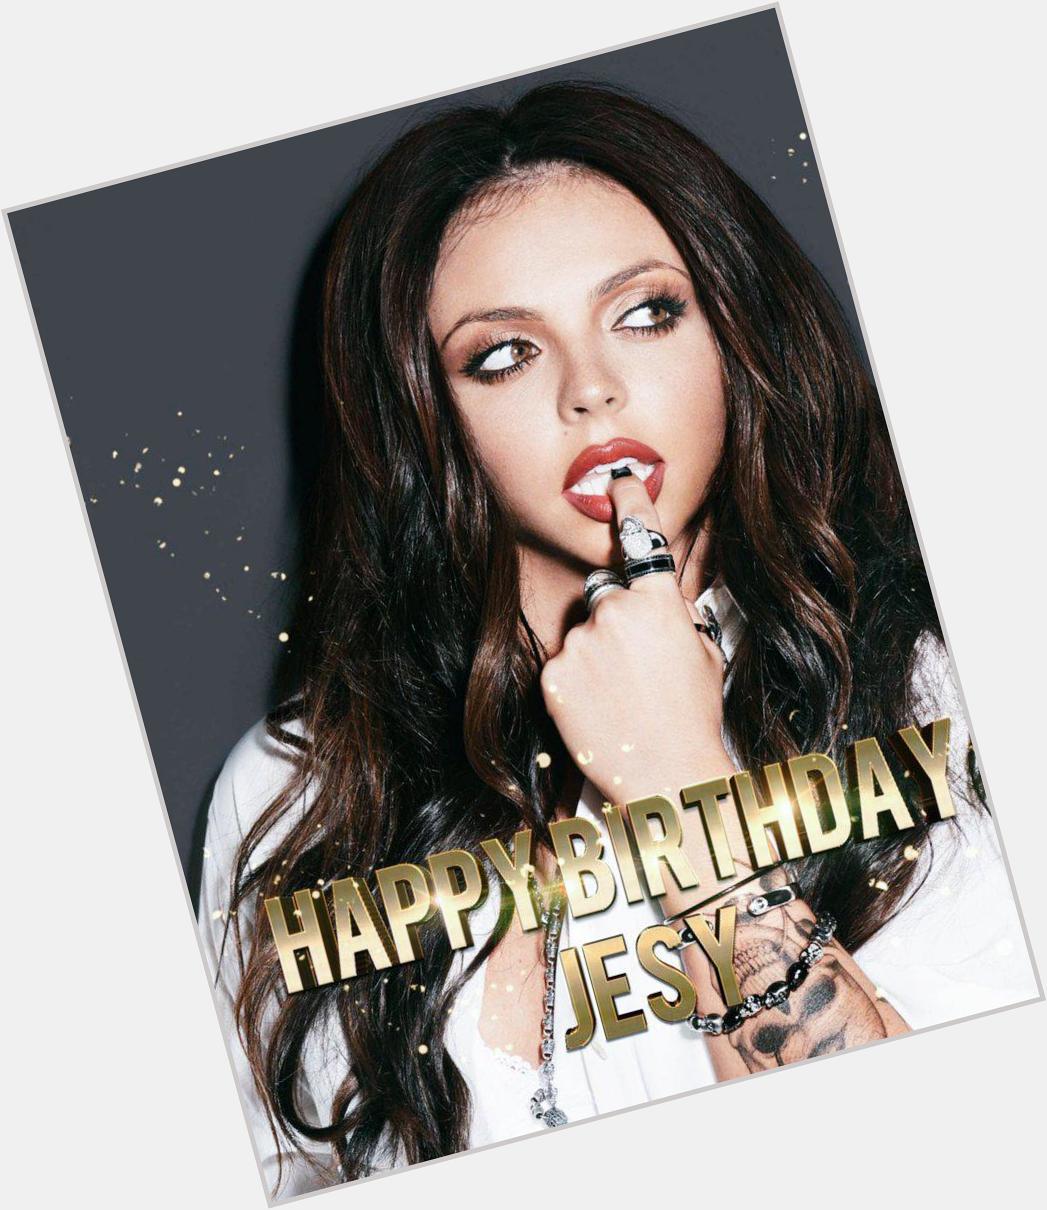 Happy birthday to the beauty,strong, wonderful Jesy Nelson I love you and i hope you have a wonderful day 